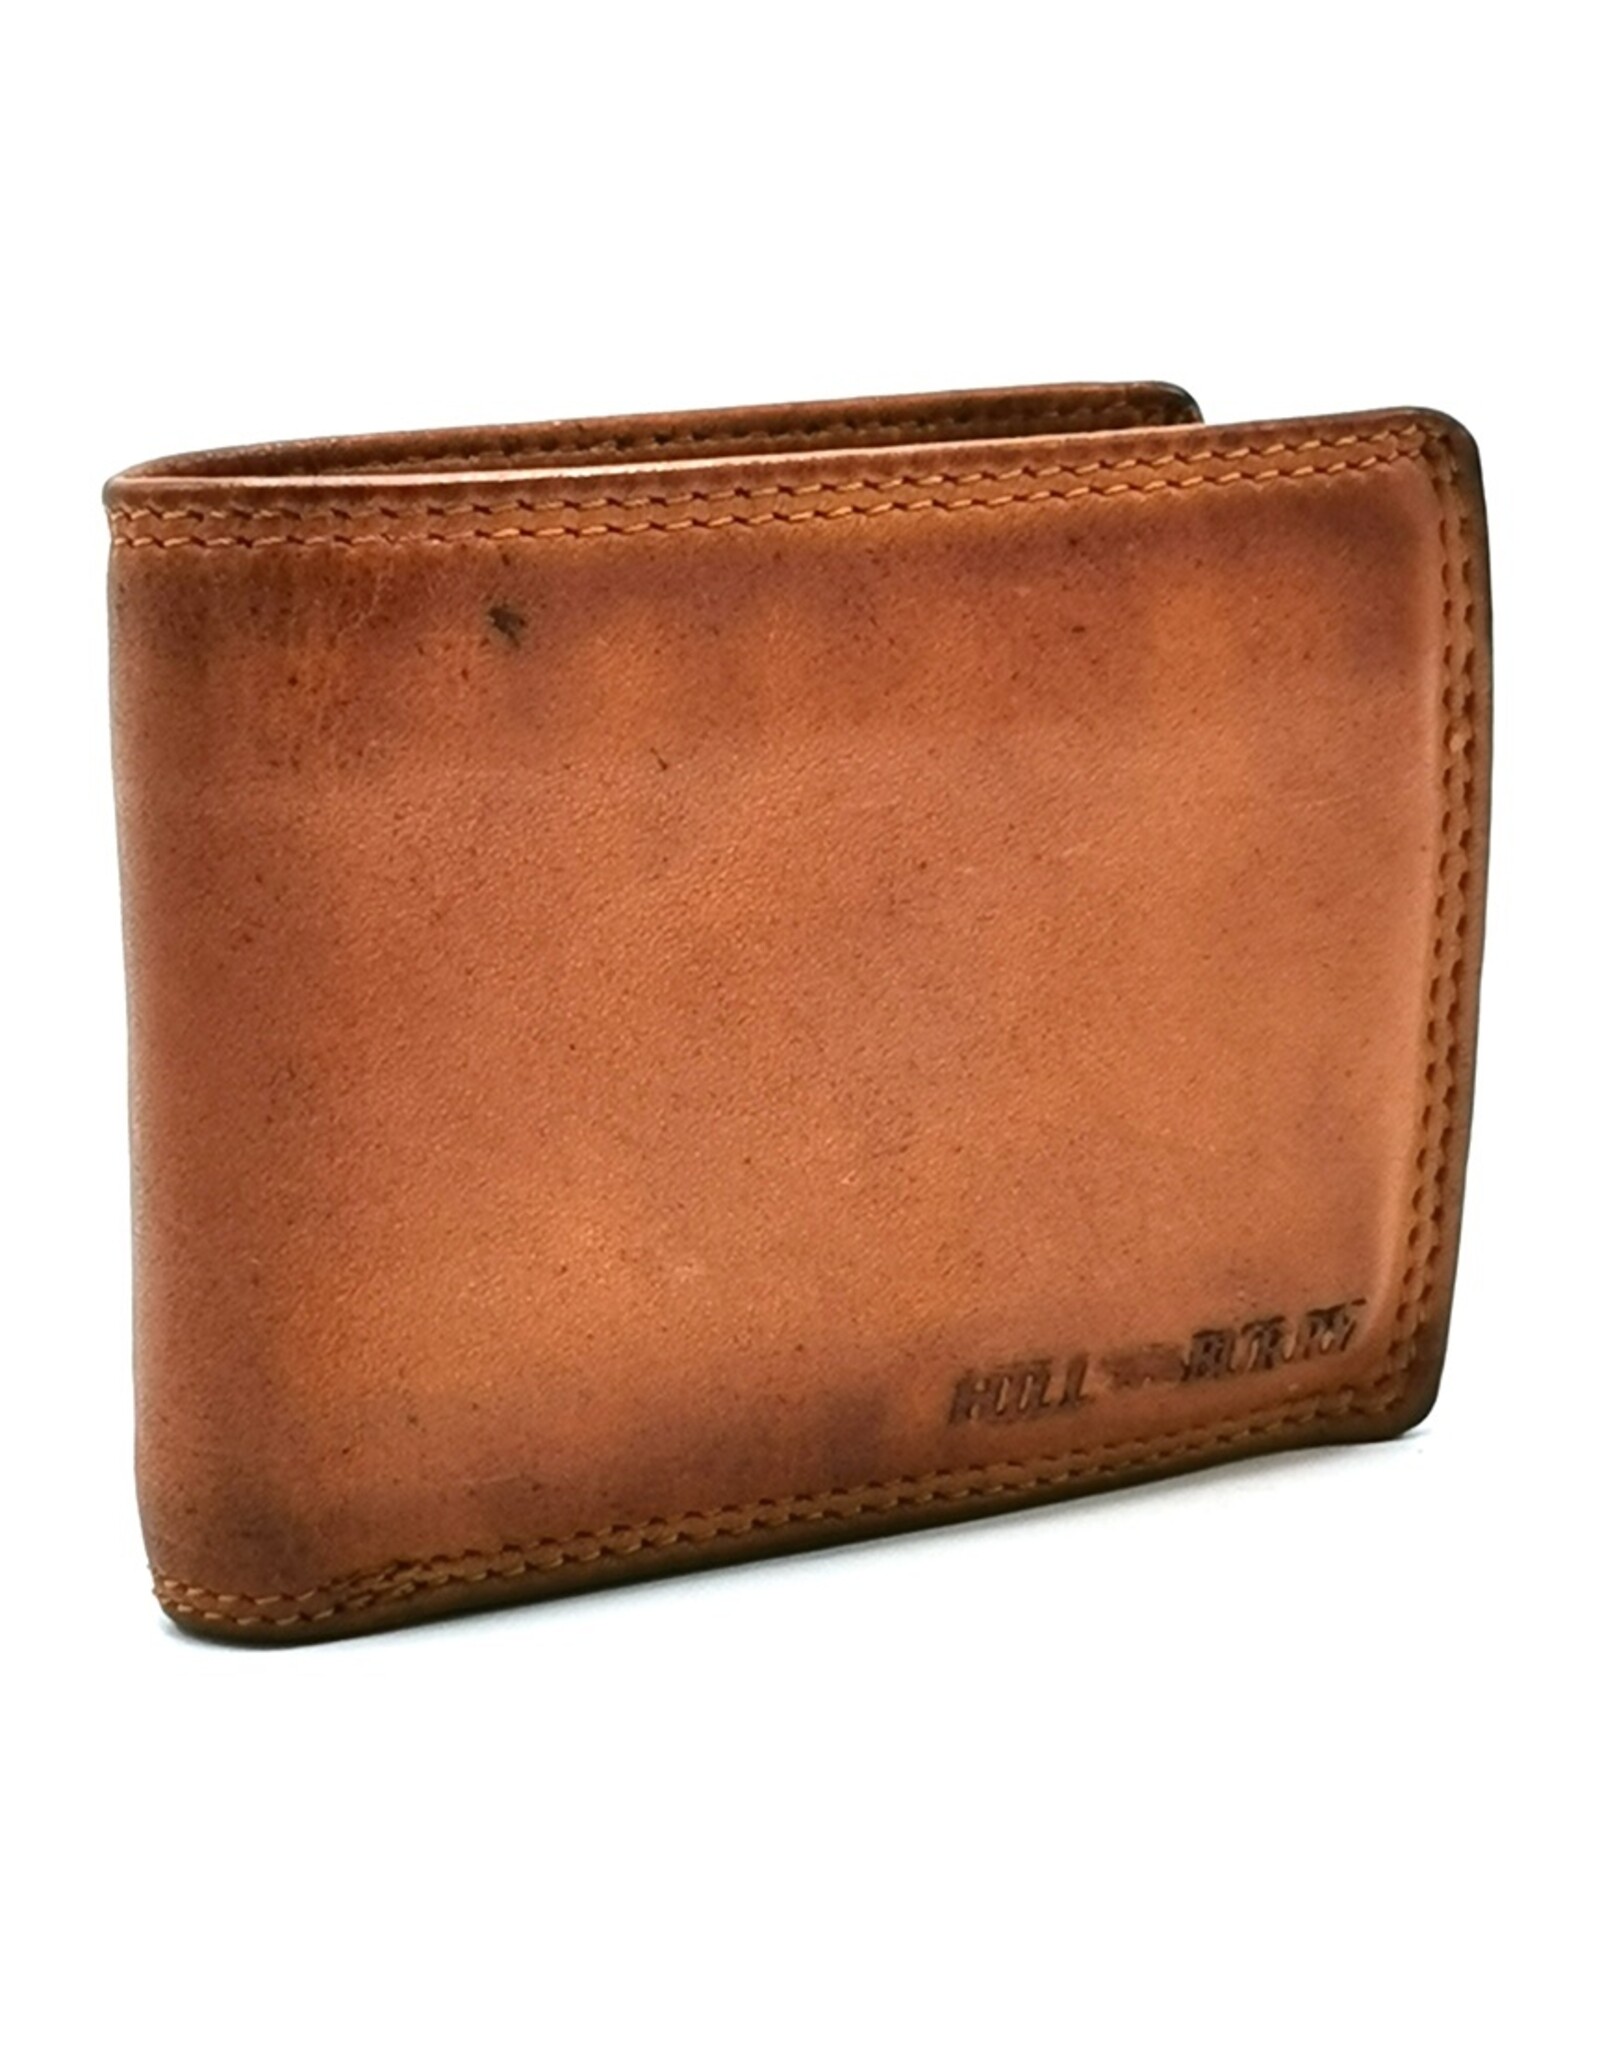 HillBurry Leather Wallets - Hillburry Bifold Wallet Washed Leather RFID